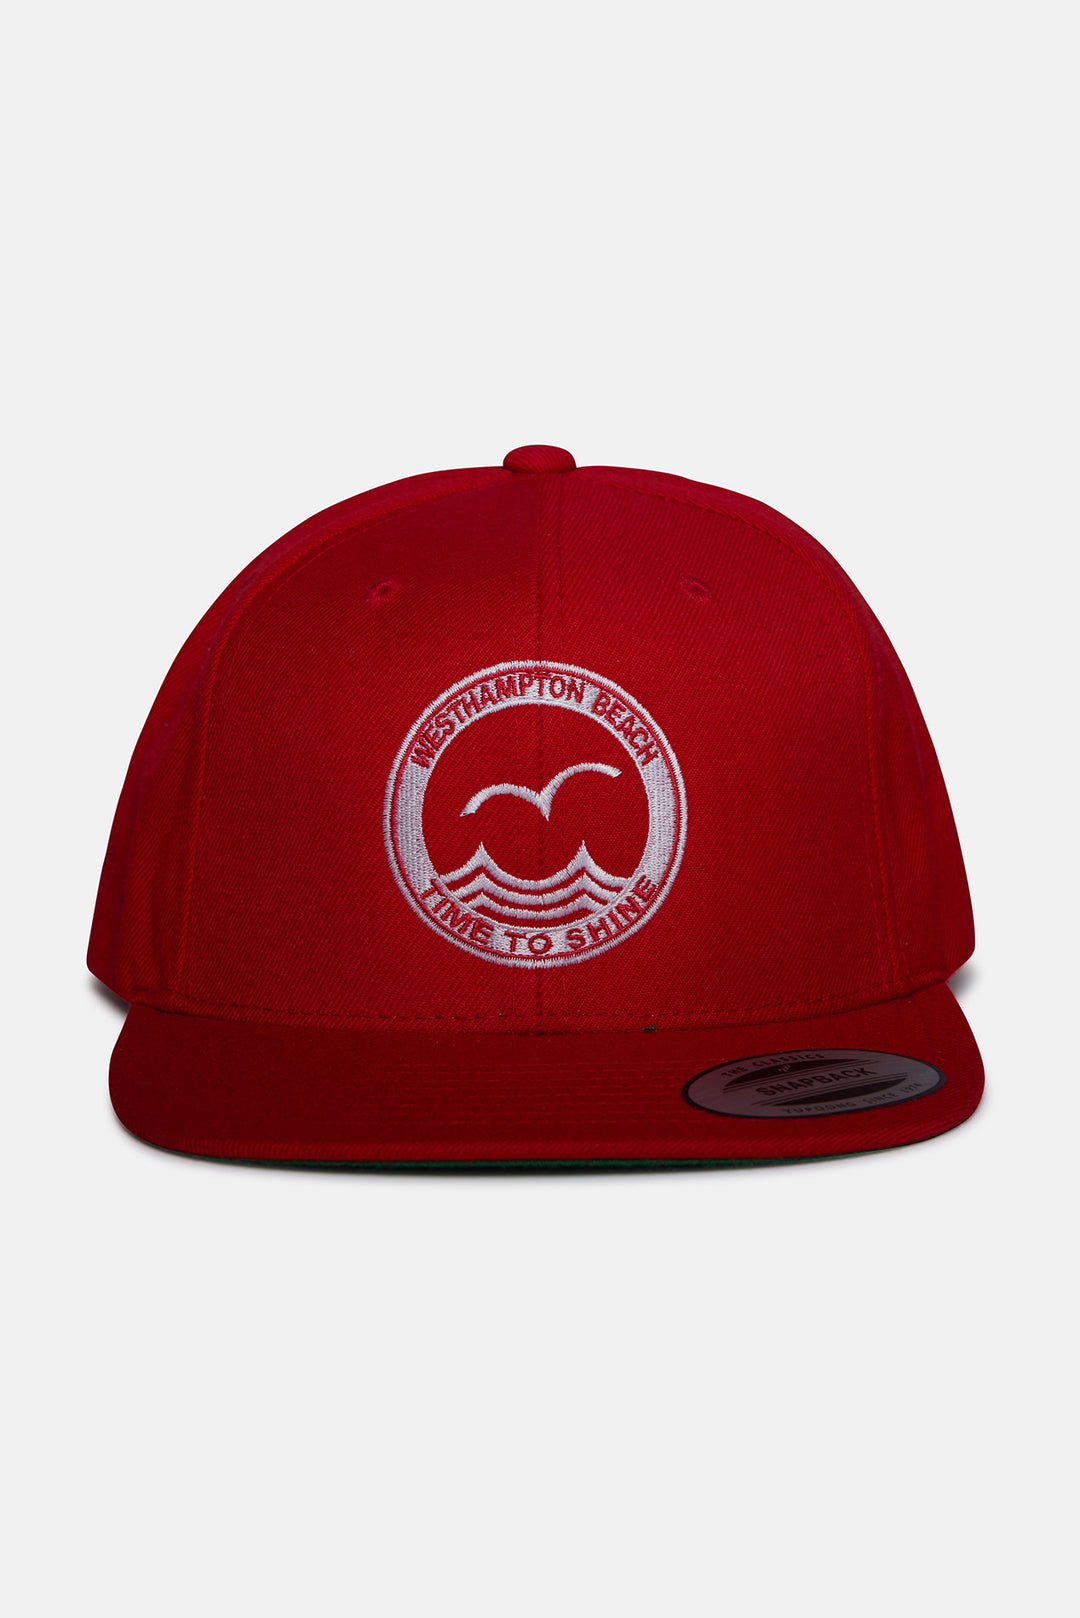 West Hampton Surf and Sun Snapback Red/White